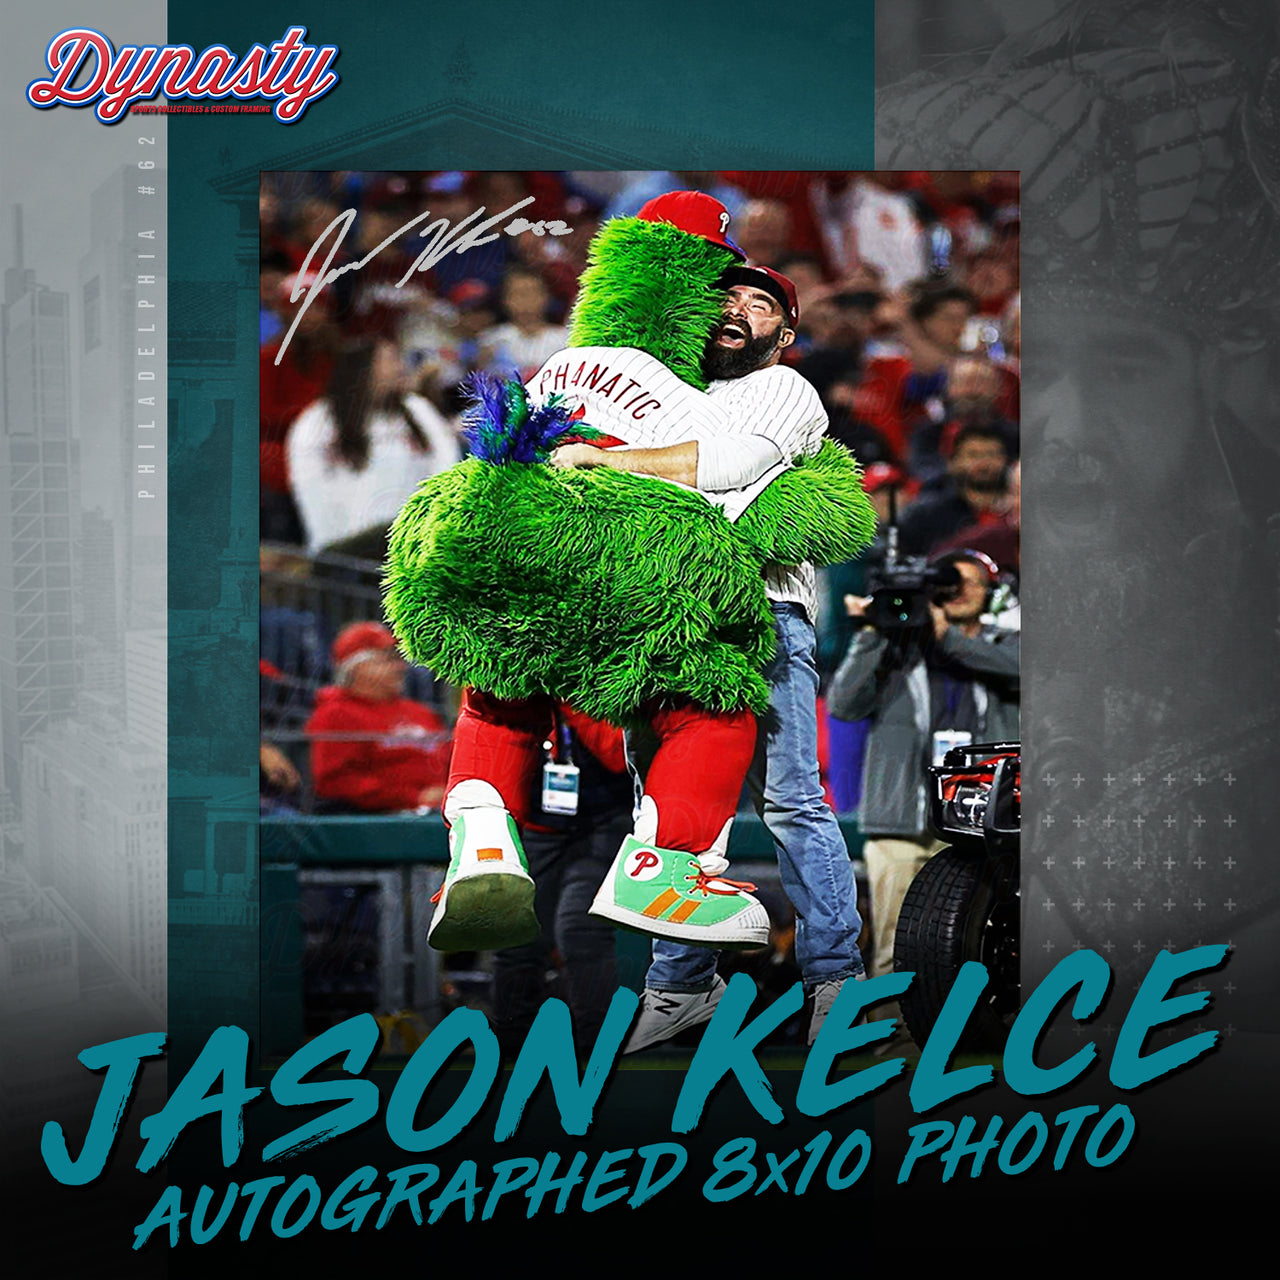 Jason Kelce Celebrates with The Phillie Phanatic NLCS Autographed Photo | Pre-Sale Opportunity - Dynasty Sports & Framing 